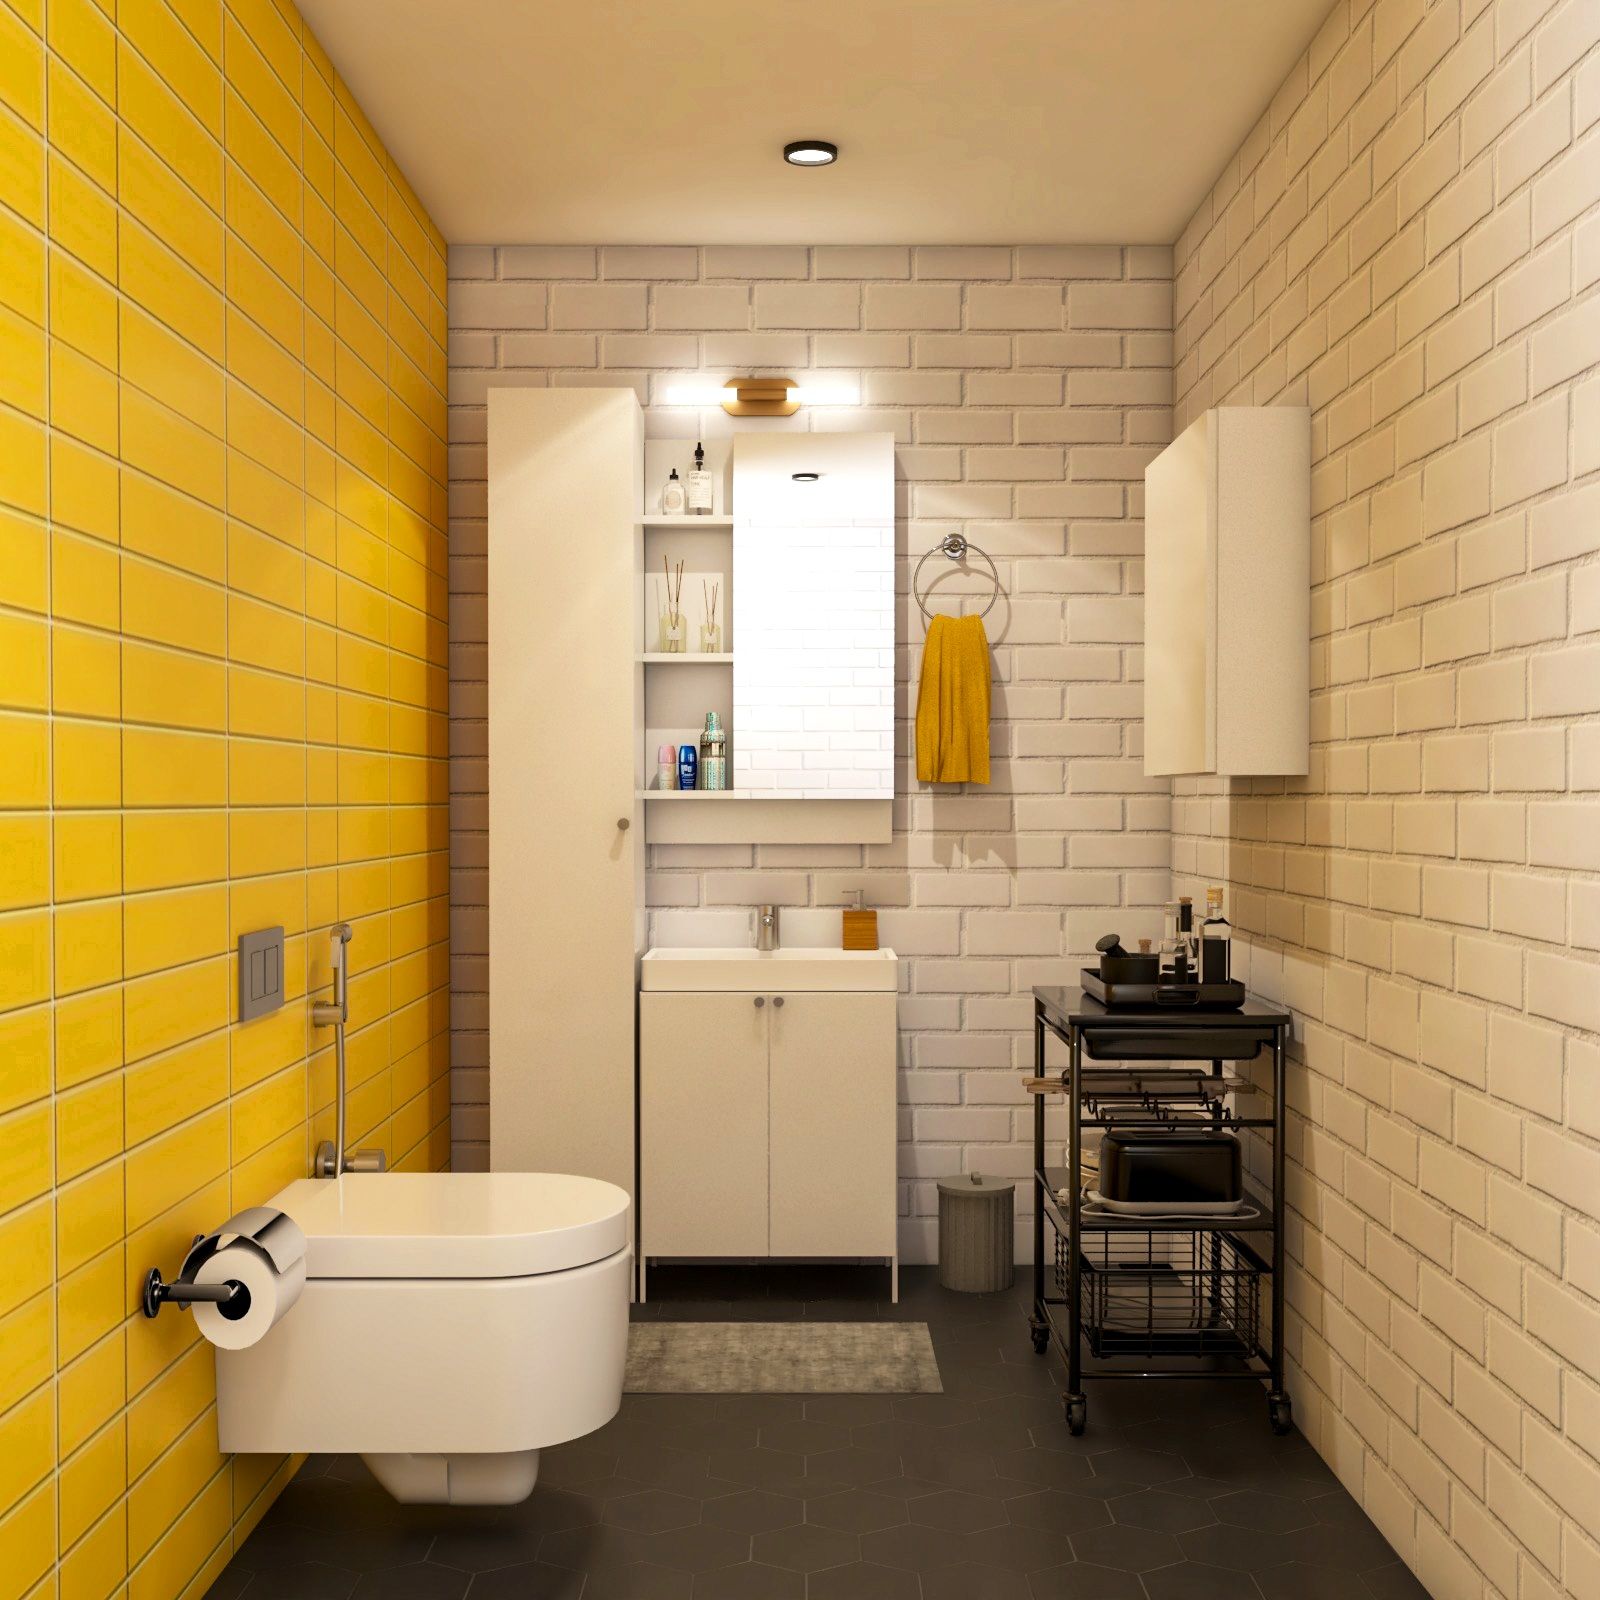 Contemporary White-Yellow And Black Bathroom Design With Shutter Storage Unit